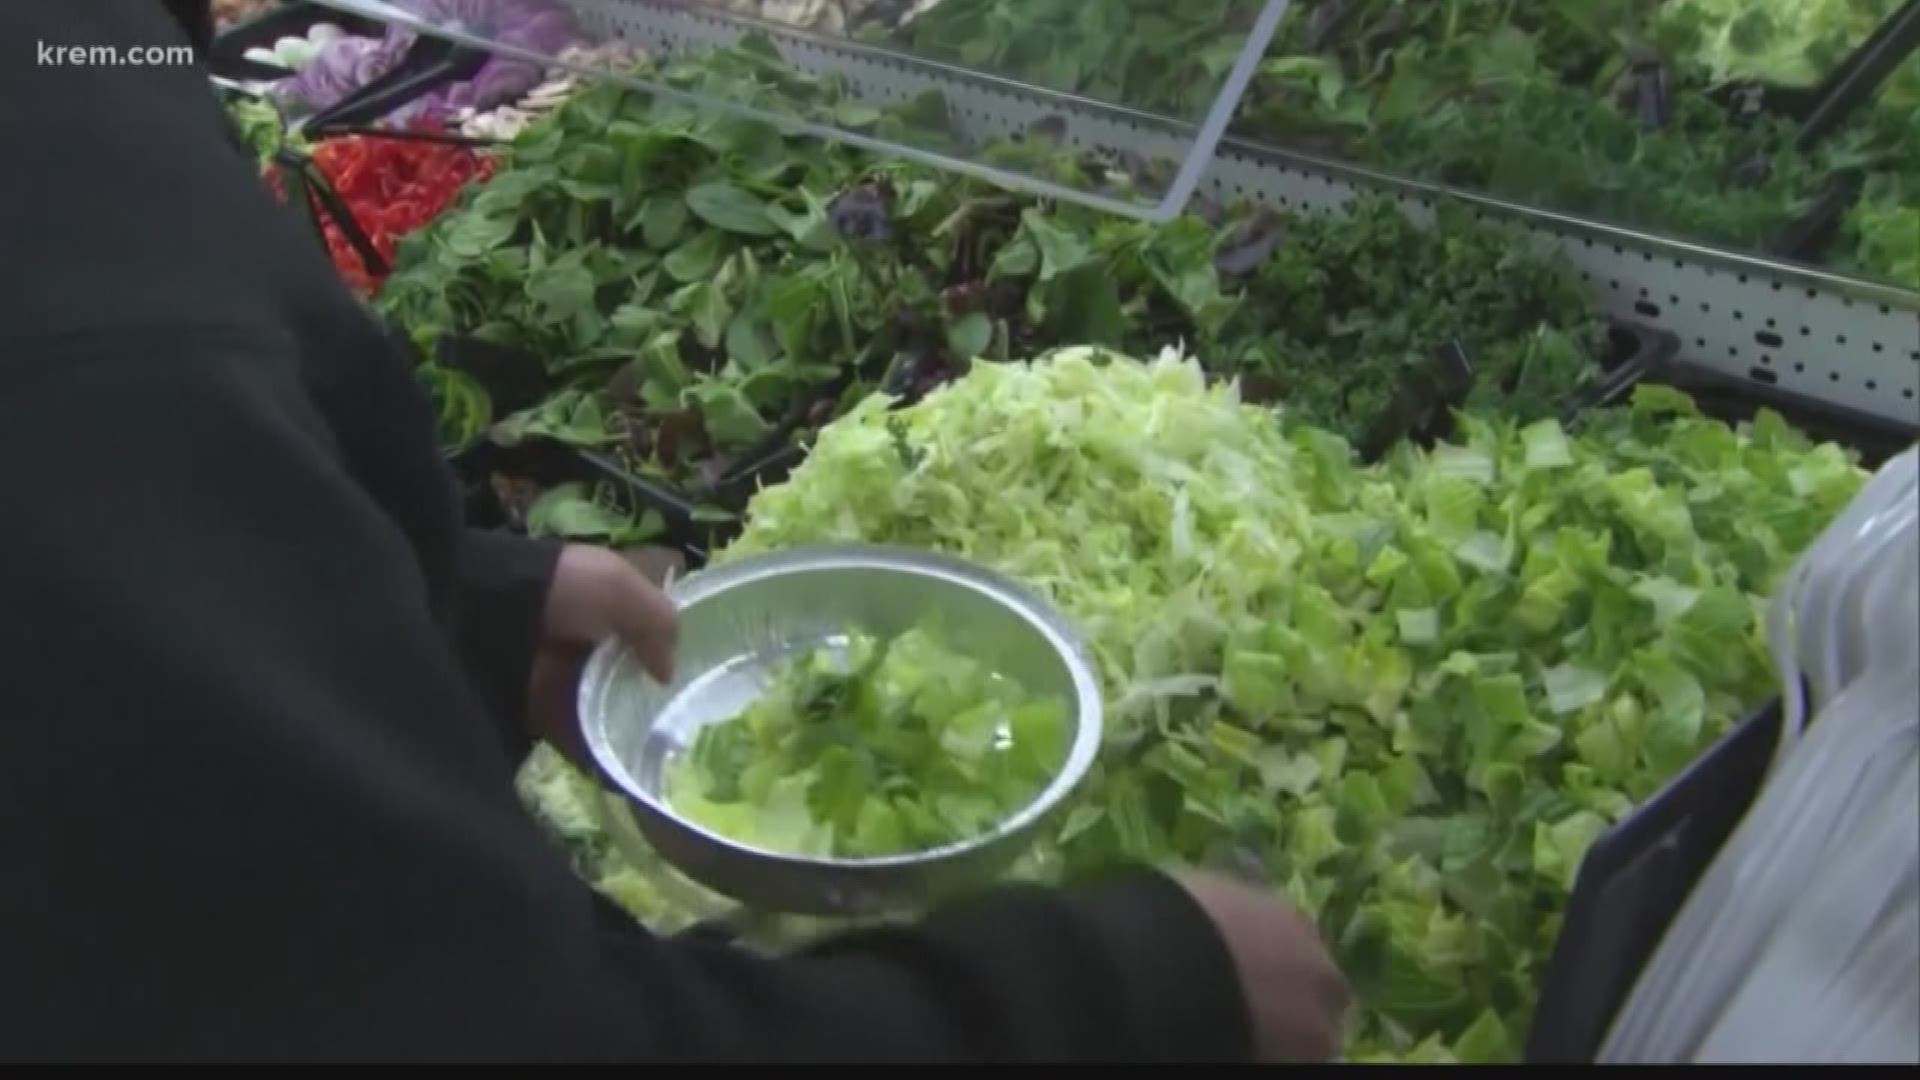 Late this afternoon we learned of more E-coli cases in Washington State linked to romaine lettuce.